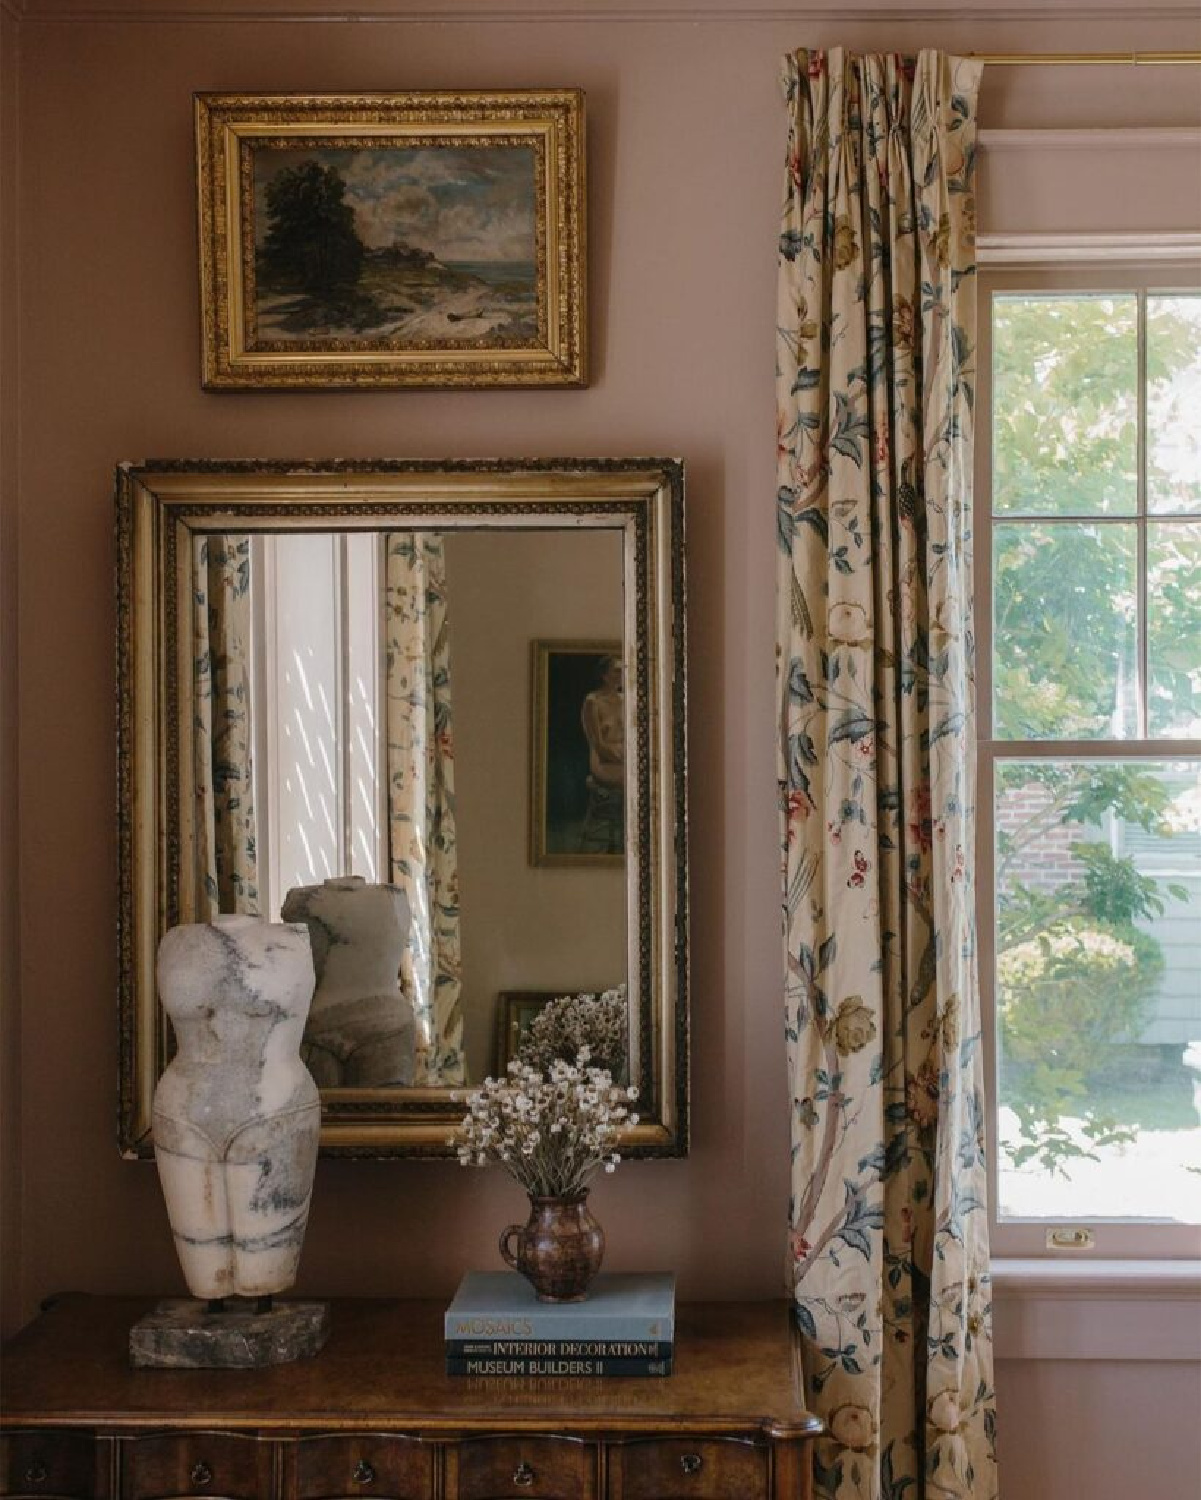 Carley Page Summers designed warm cozy European country interior with rosy pink walls. #europeancottage #warmcozyinteriors #rusticelegance #europeancountry